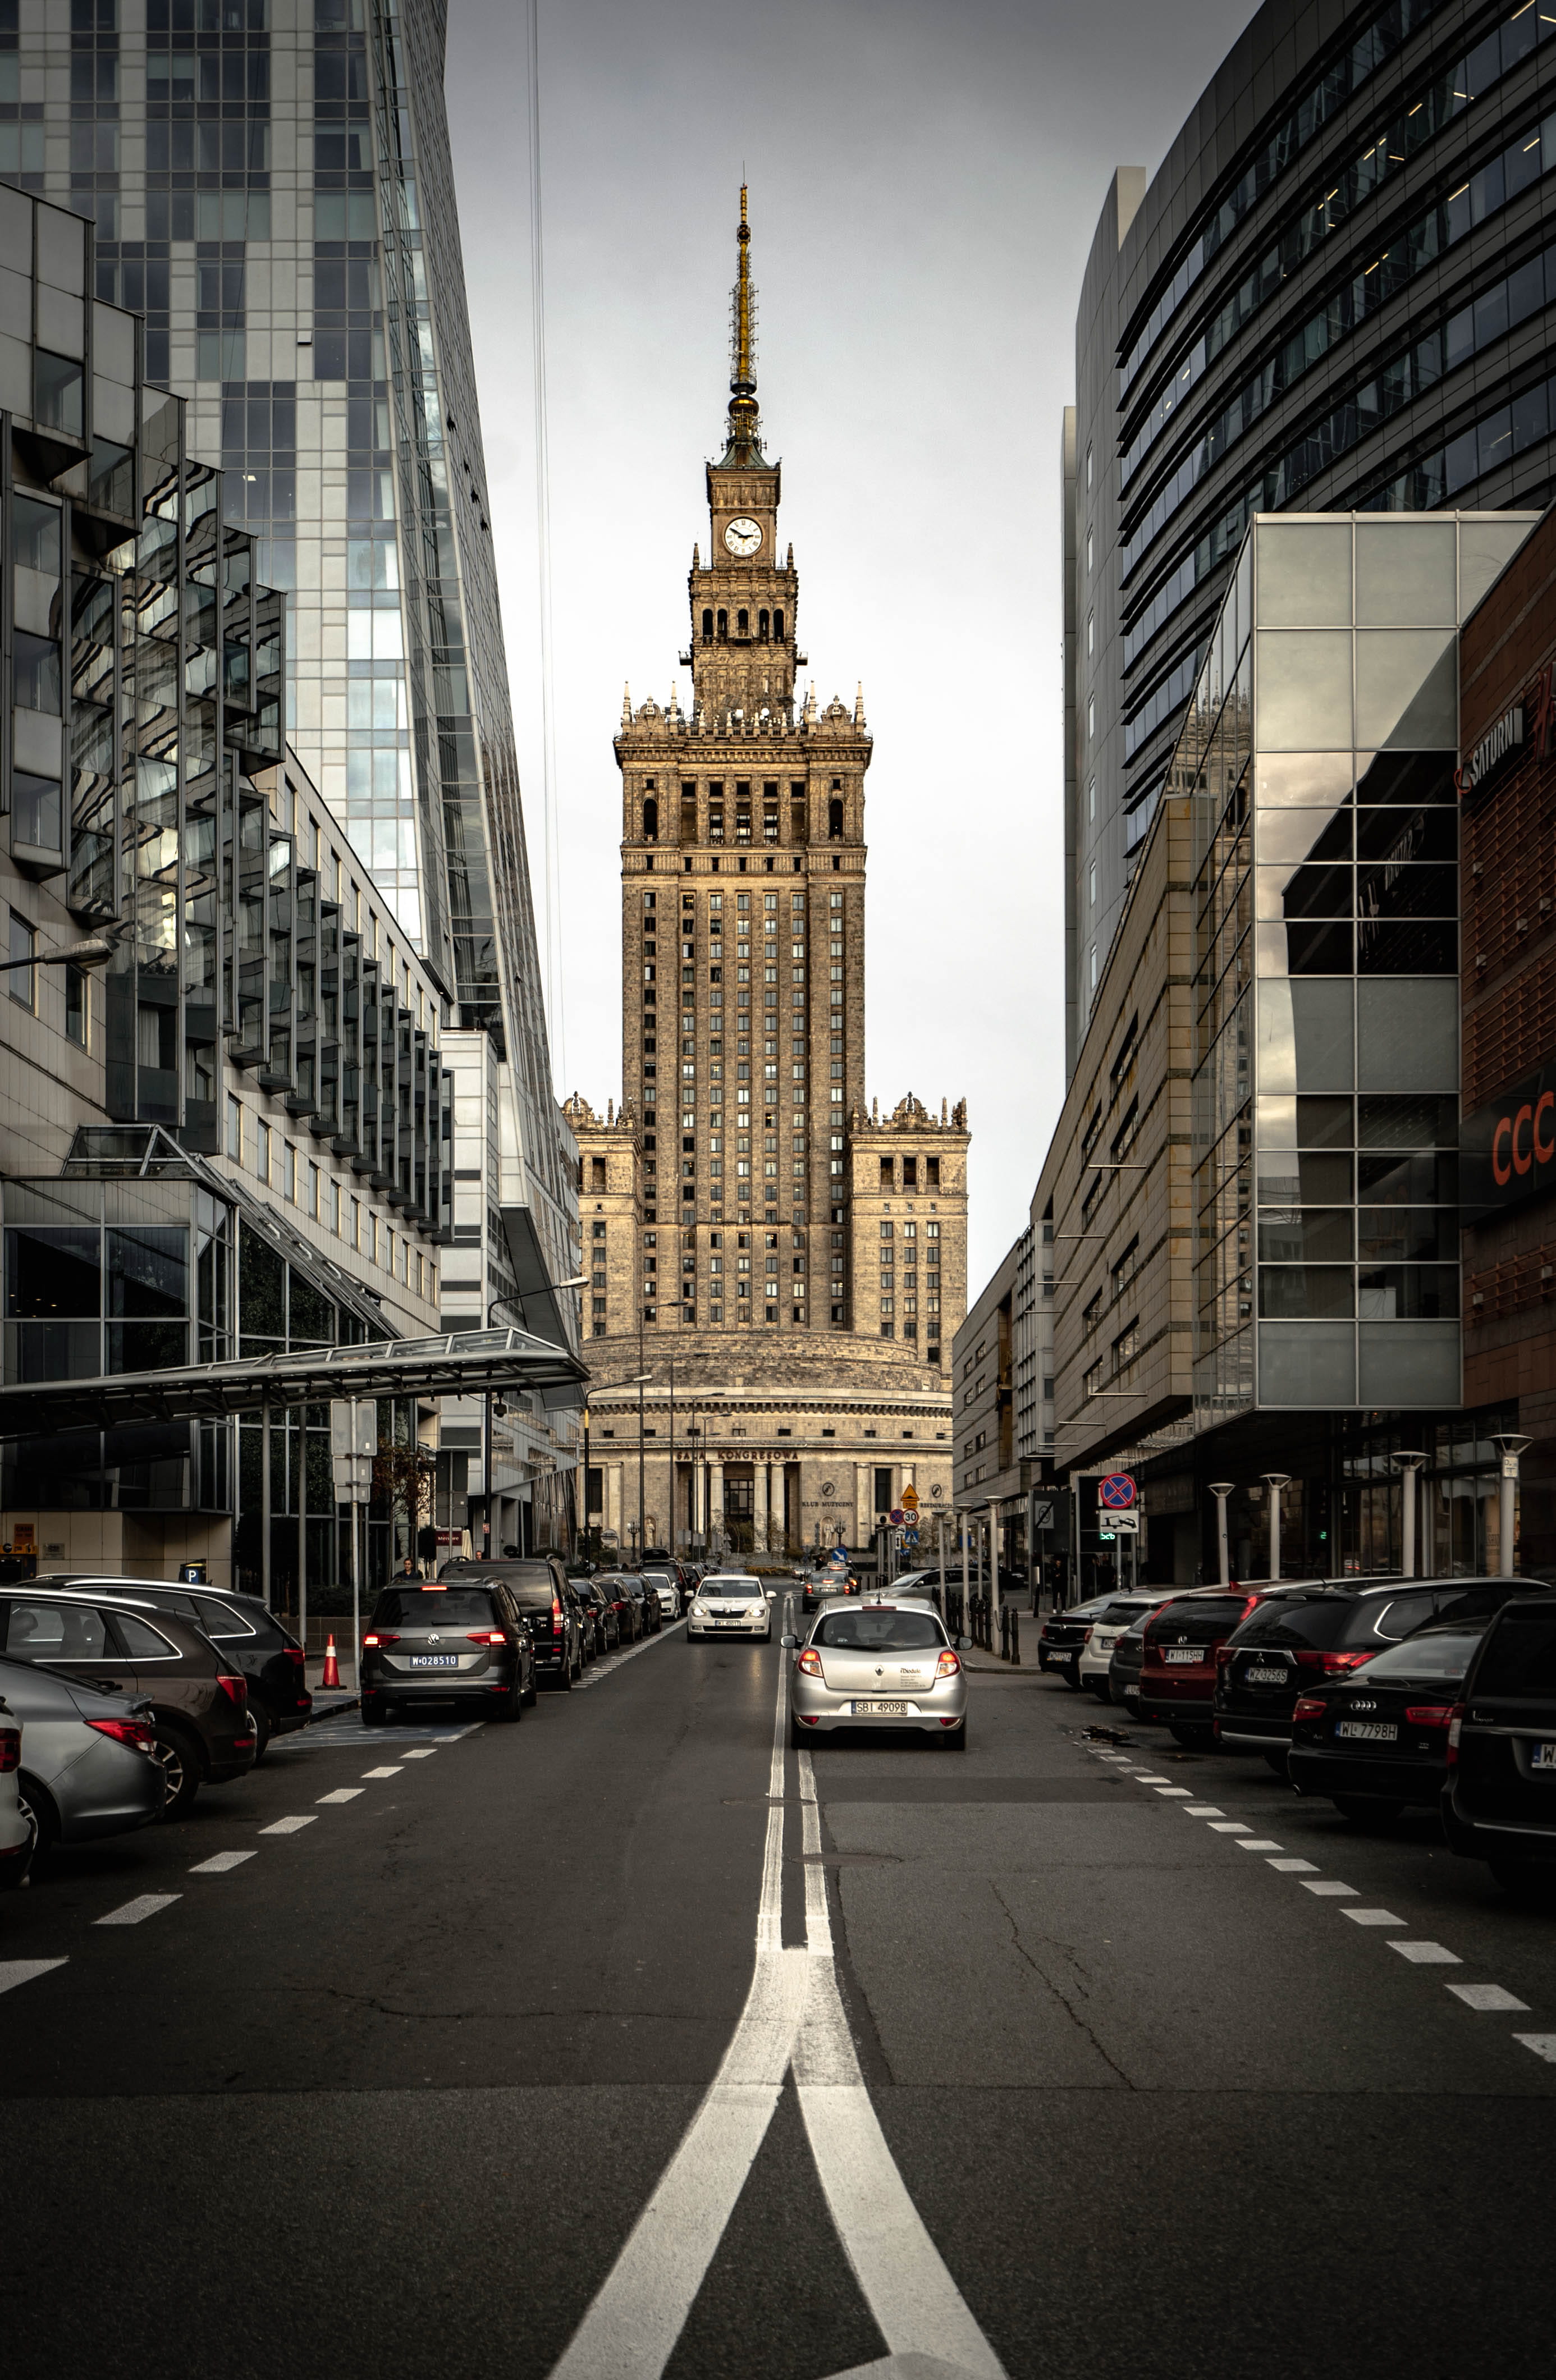 Palace of Culture and Science Building in Warsaw, Poland, architecture